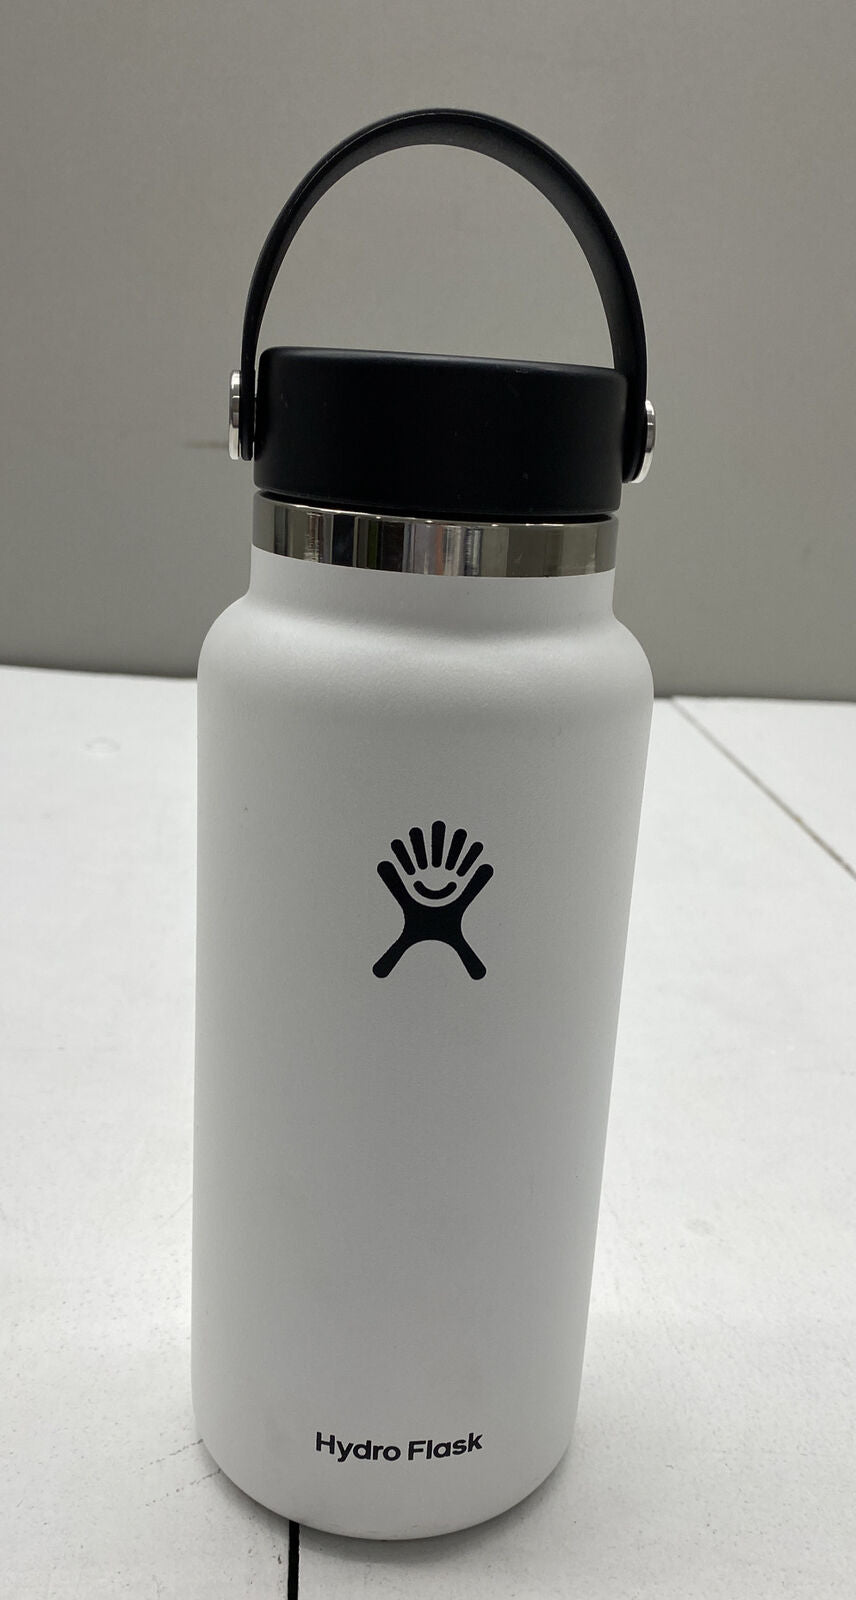 Hydro Flask Insulated Stainless Steel Wide Mouth Water Bottle and